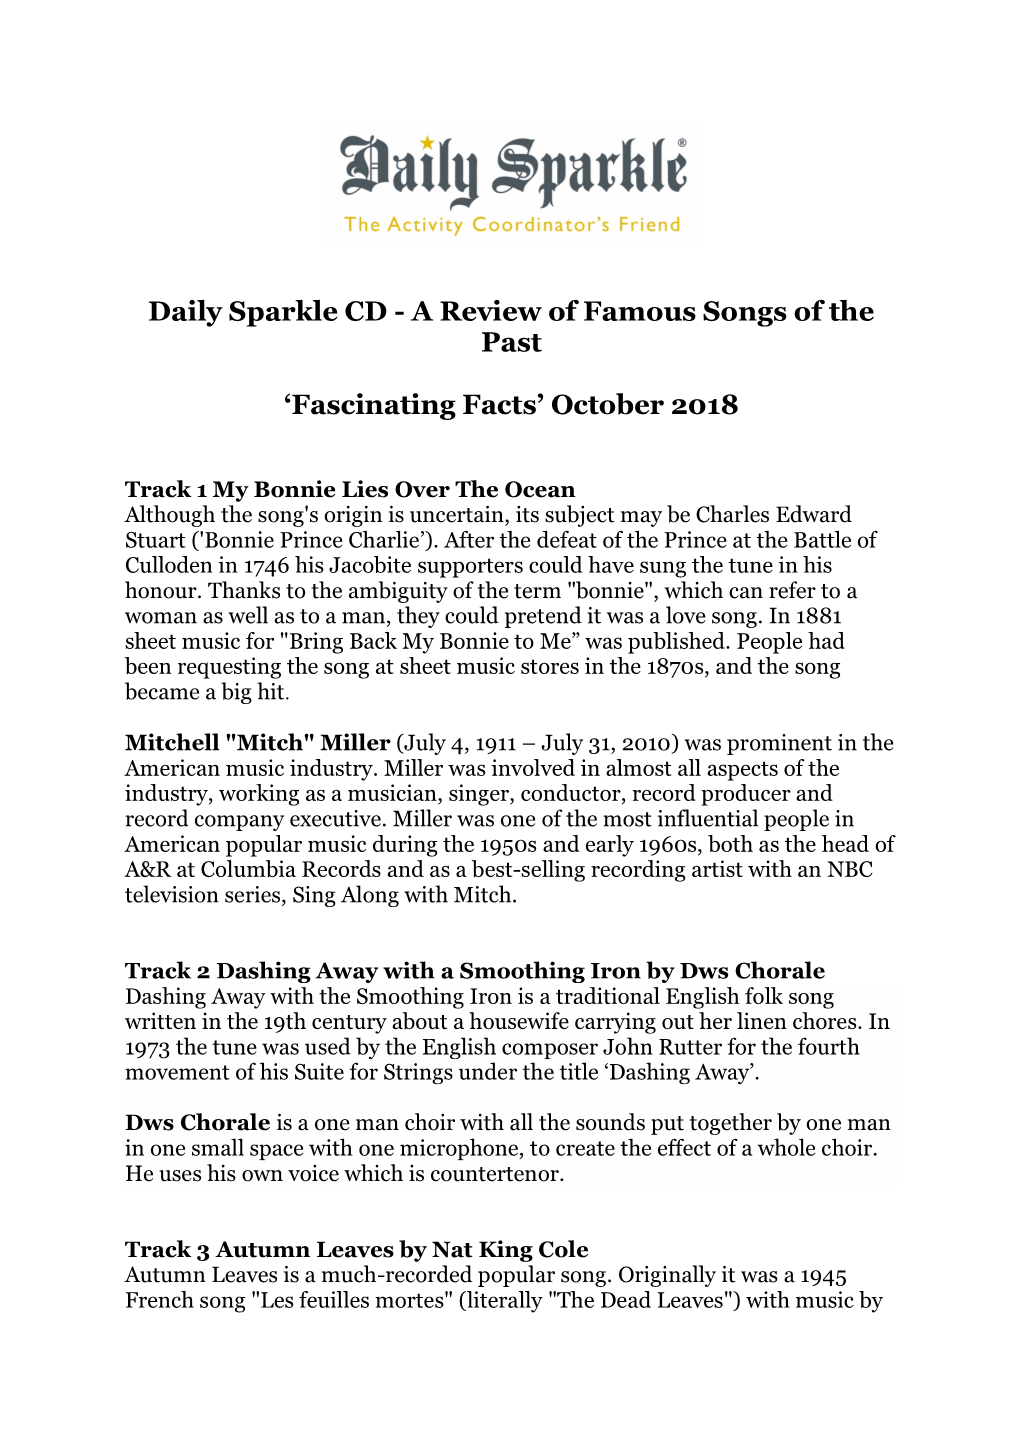 Fasc Facts October 2018